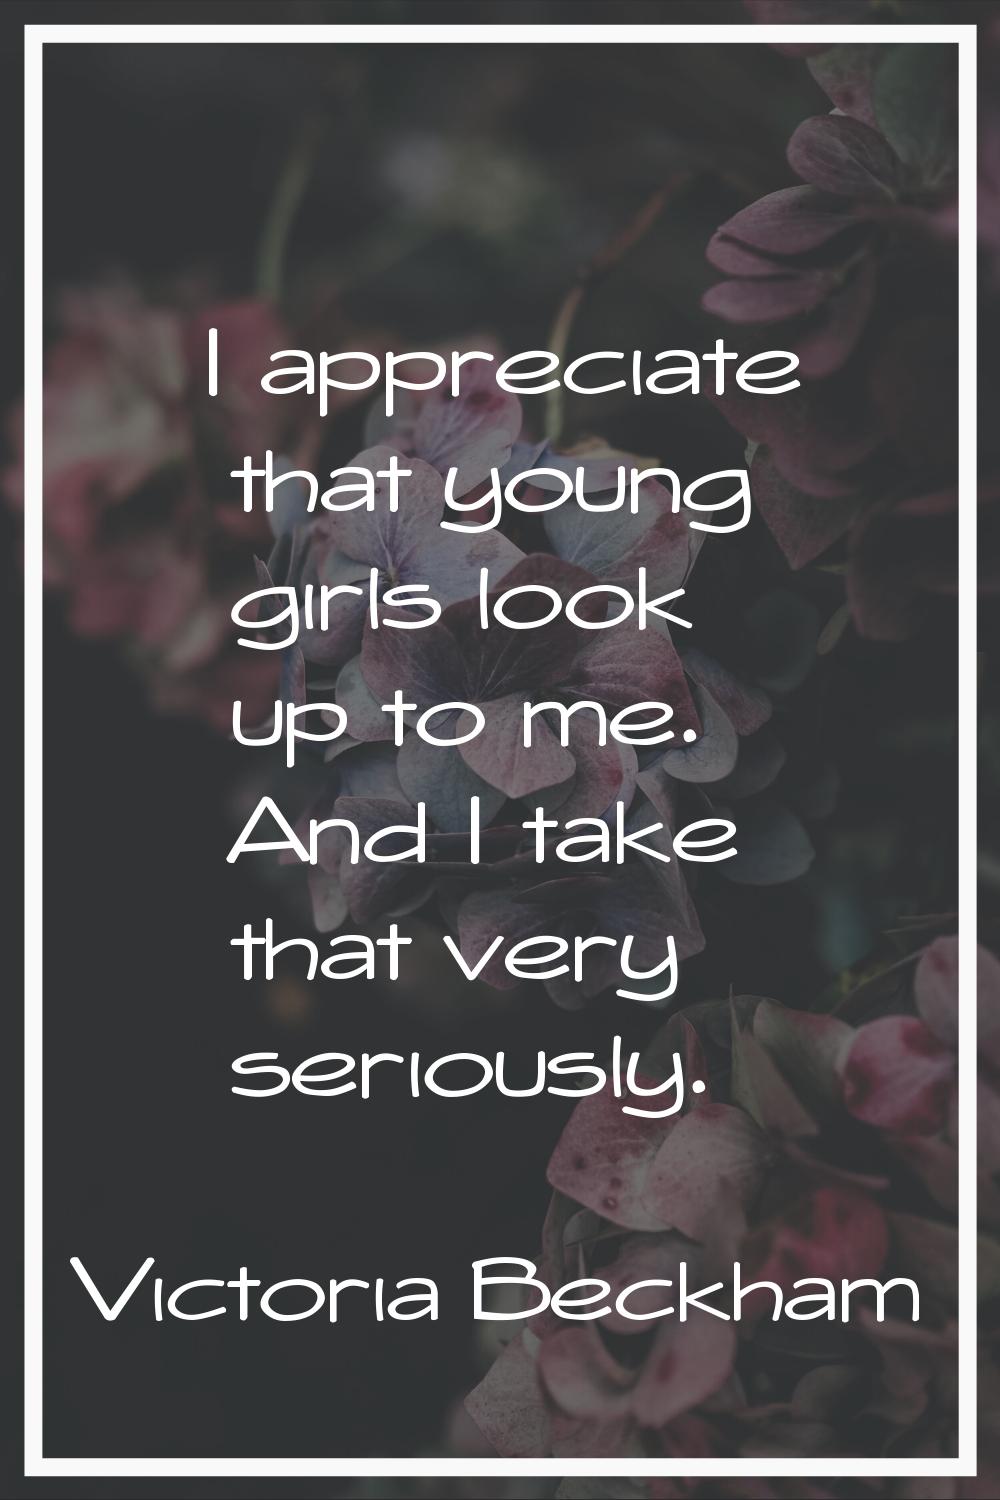 I appreciate that young girls look up to me. And I take that very seriously.